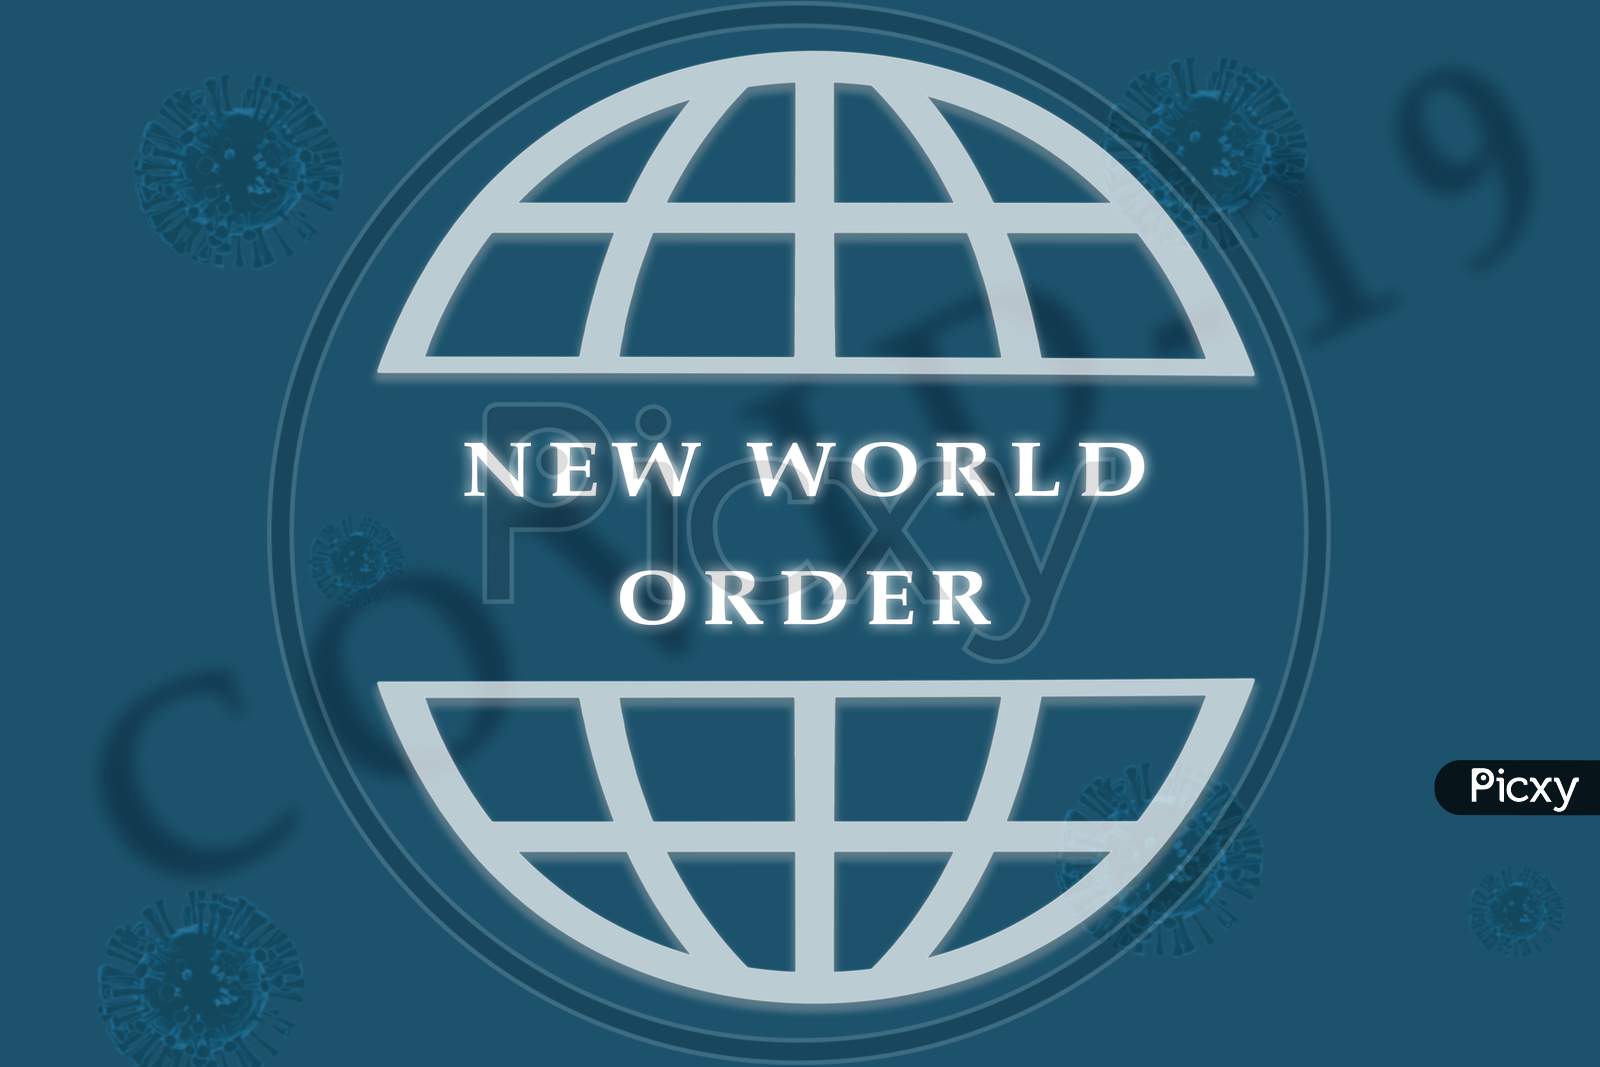 Concept Of New World Order In Geopolitics After Covid-19 Or Coronavirus Outbreak Showing With 3D Rendered Illustration Of Virus As Background.